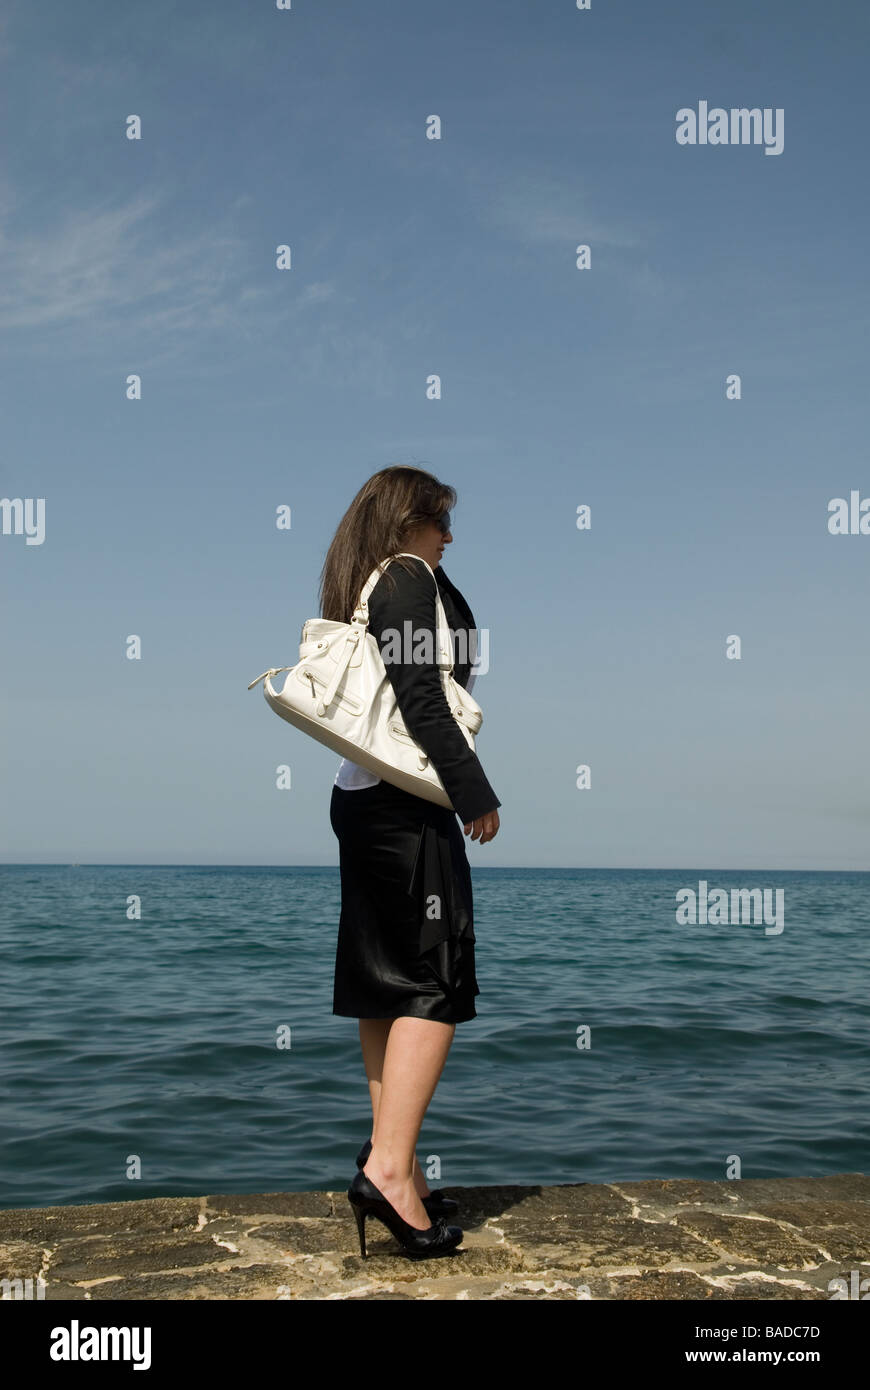 Business woman standing by the sea carrying a handbag Stock Photo